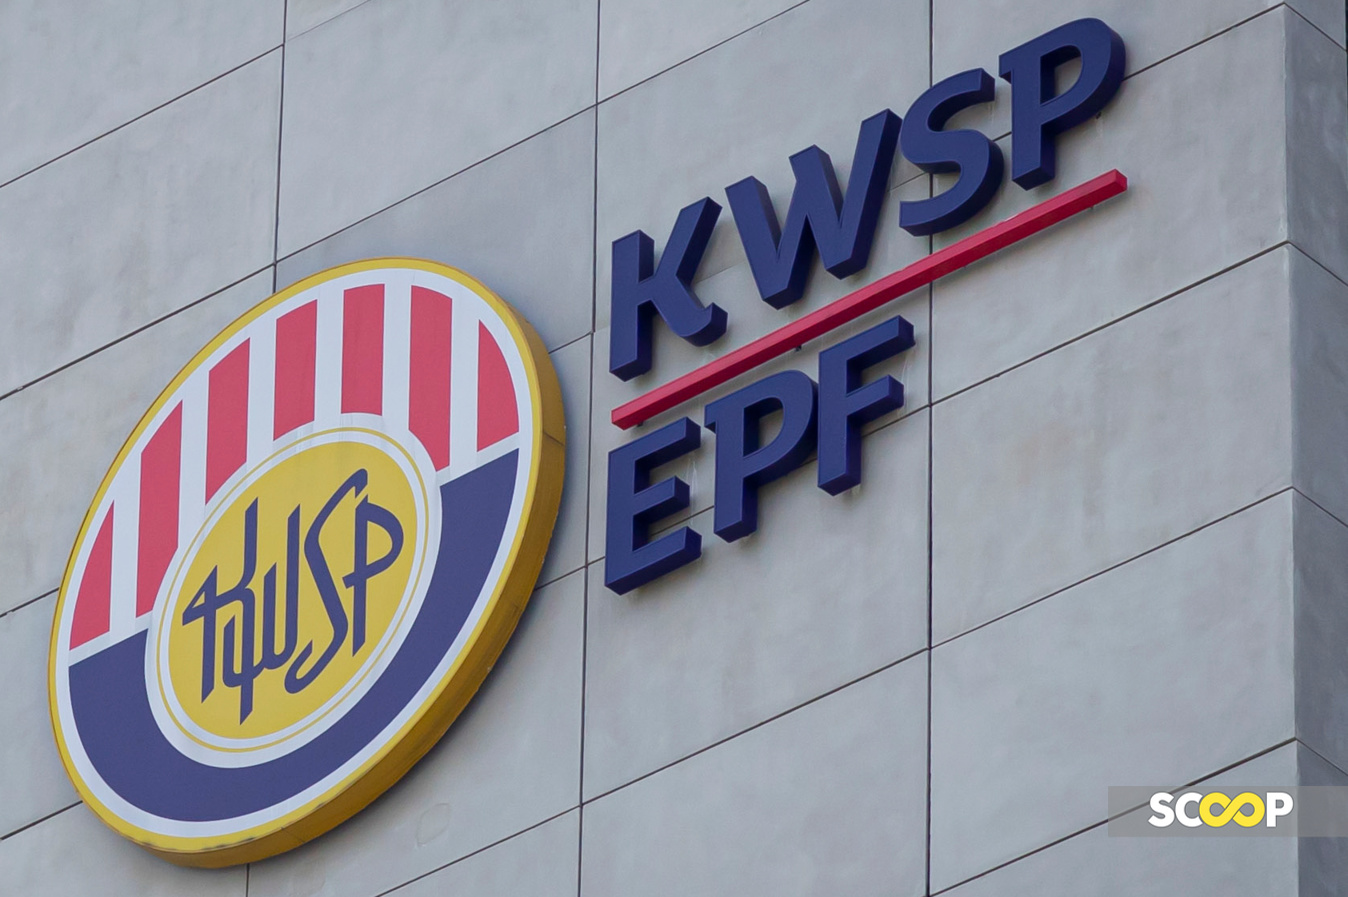 Targeted EPF withdrawal will worsen ‘alarming’ insufficiency of retirement savings: MoF